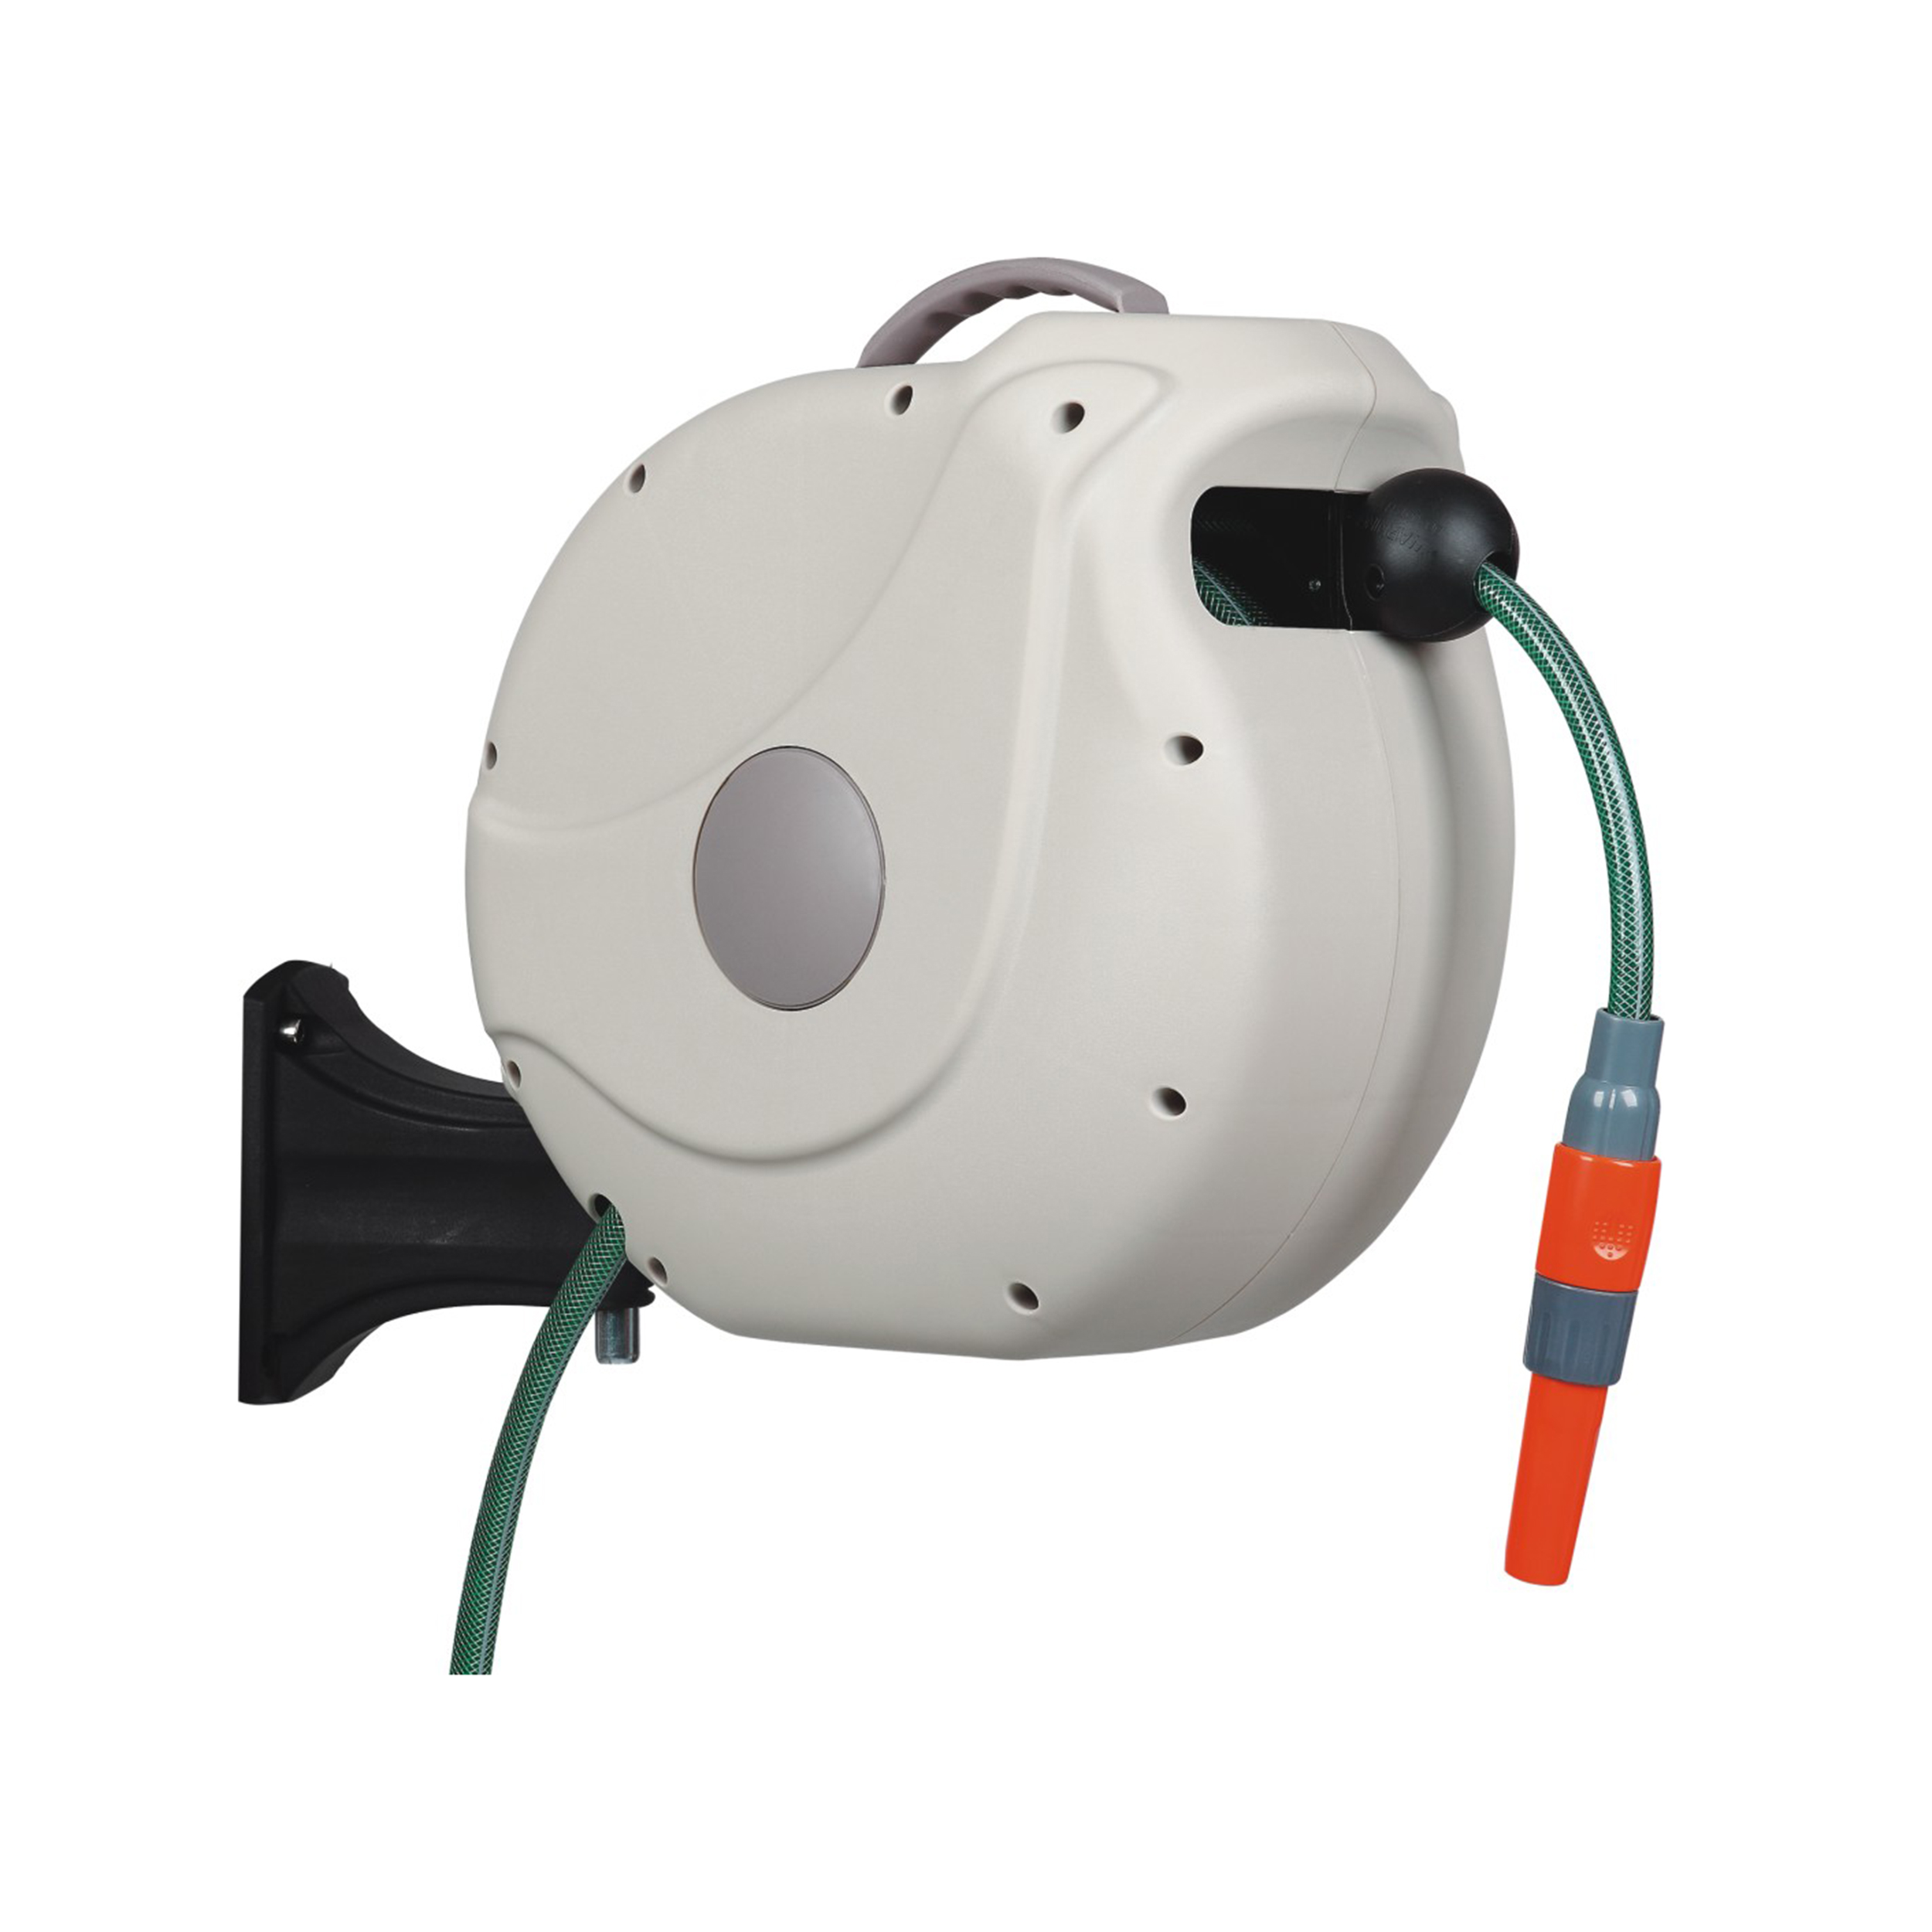 1/2" Nw Retractable Hose Reel With 30m/98 Ft. Hose